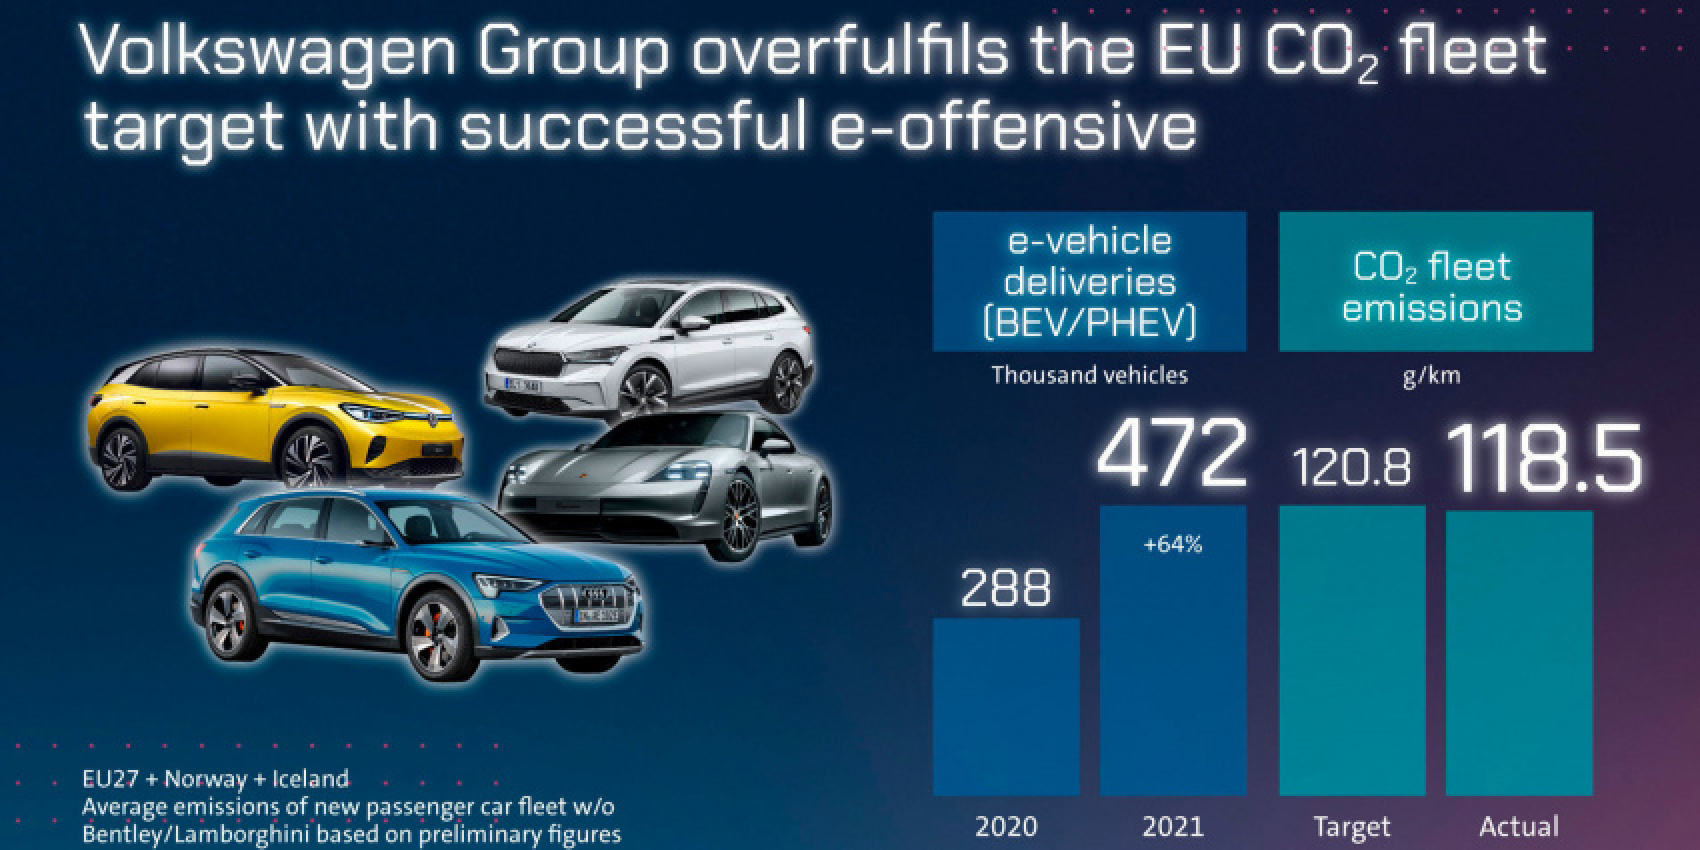 autos, cars, volkswagen, volkswagen group increases ev deliveries by 64% in 2021, beats eu co2 emissions target by 2%